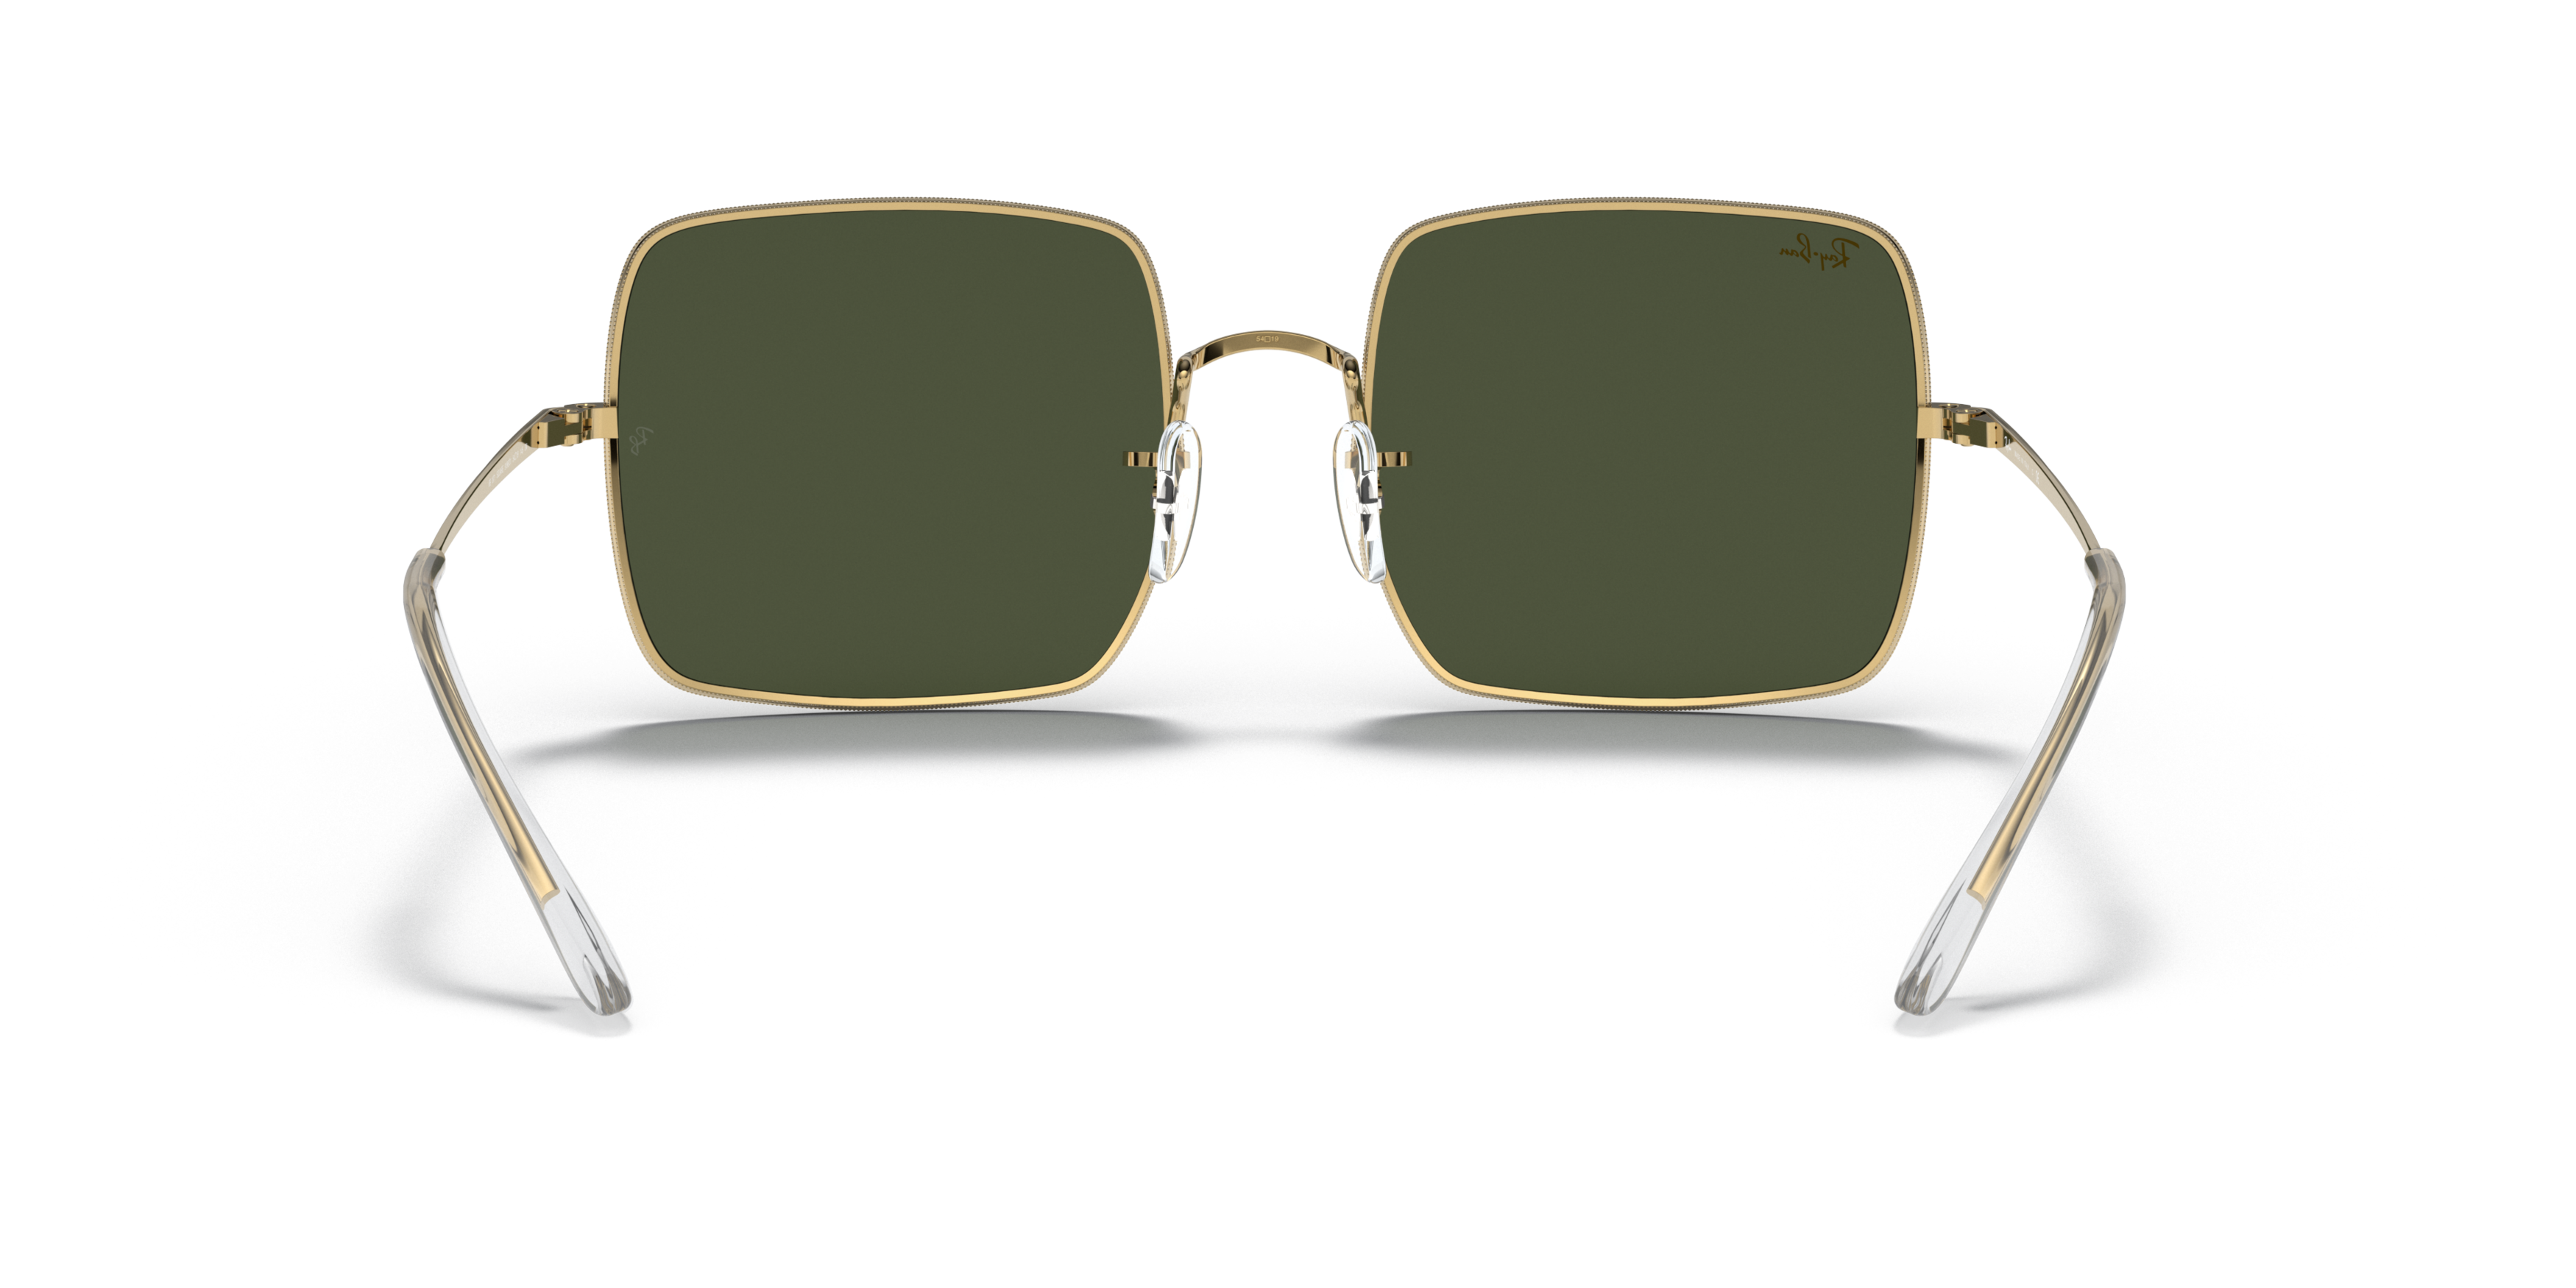 [products.image.detail02] Ray-Ban Square 1971 Legend Gold RB1971 919631